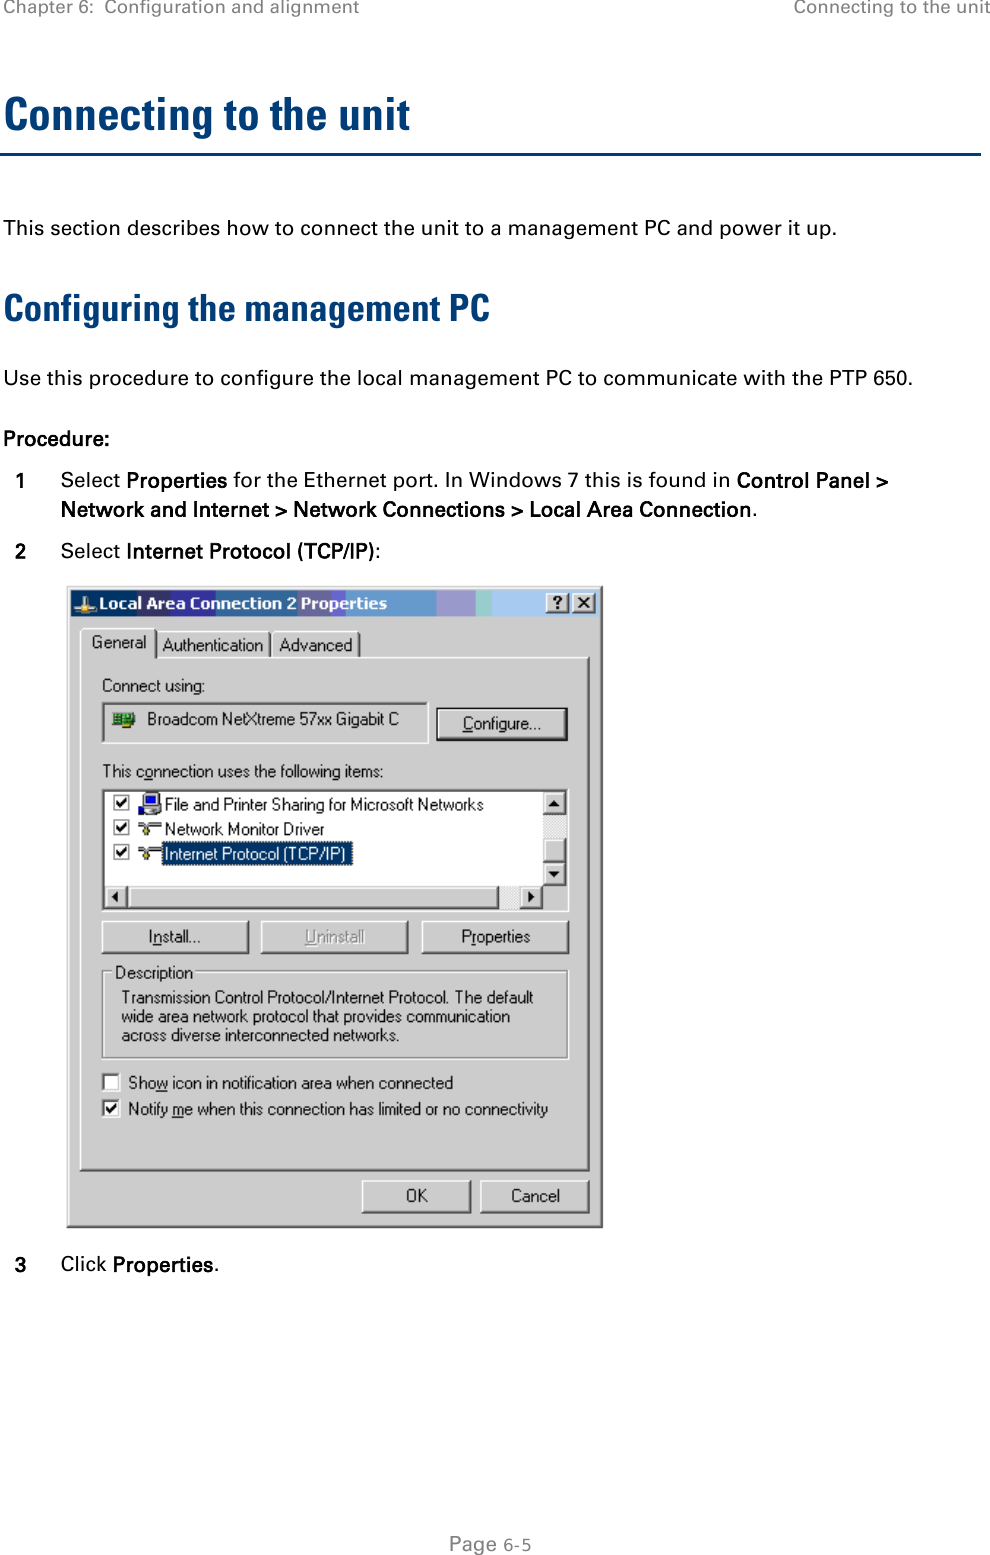 Chapter 6:  Configuration and alignment Connecting to the unit  Connecting to the unit This section describes how to connect the unit to a management PC and power it up.  Configuring the management PC Use this procedure to configure the local management PC to communicate with the PTP 650. Procedure: 1 Select Properties for the Ethernet port. In Windows 7 this is found in Control Panel &gt; Network and Internet &gt; Network Connections &gt; Local Area Connection. 2 Select Internet Protocol (TCP/IP):  3 Click Properties.  Page 6-5 